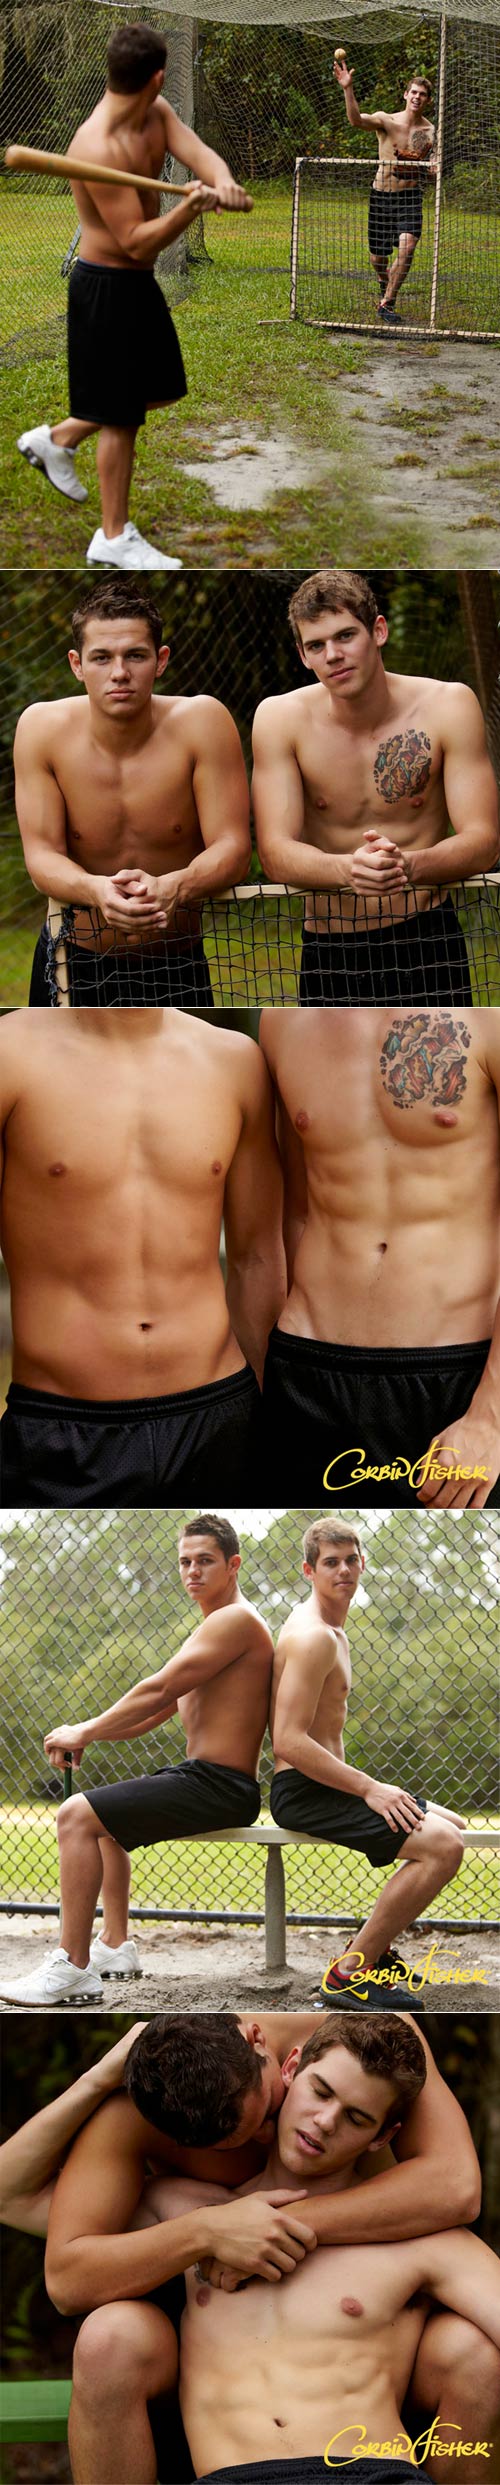 Sam & Levi (Sam's First Time) at CorbinFisher